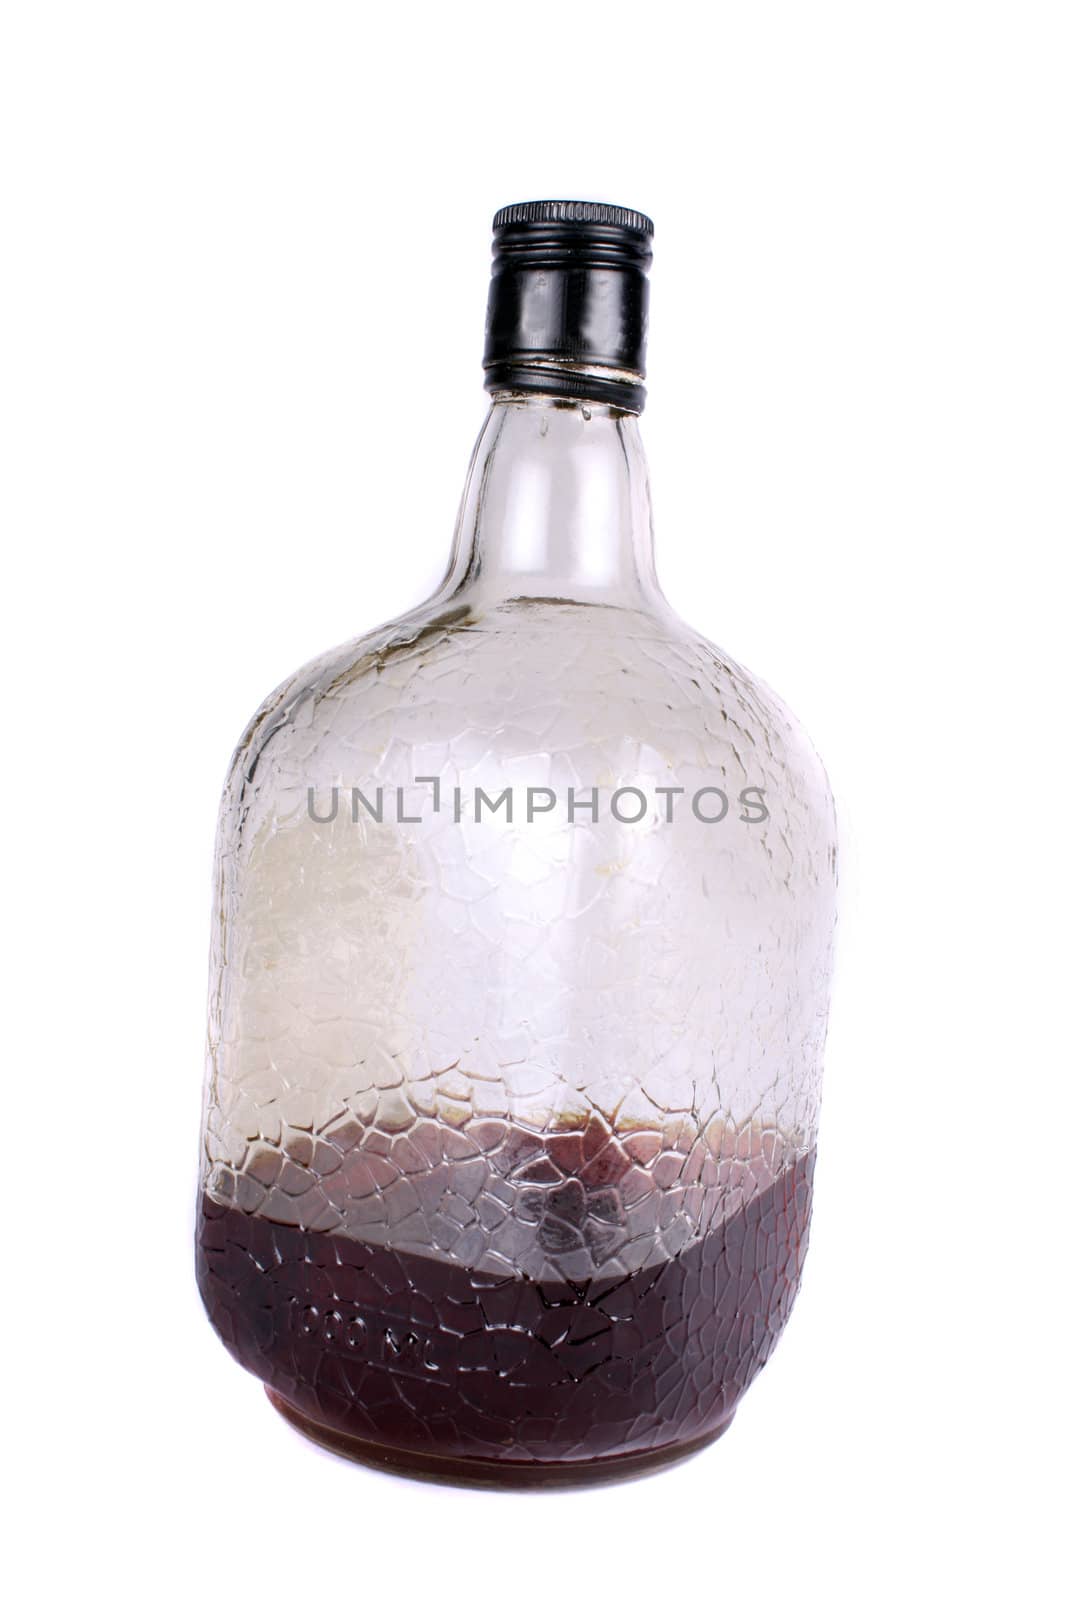 A bottle containing rum, on white background.